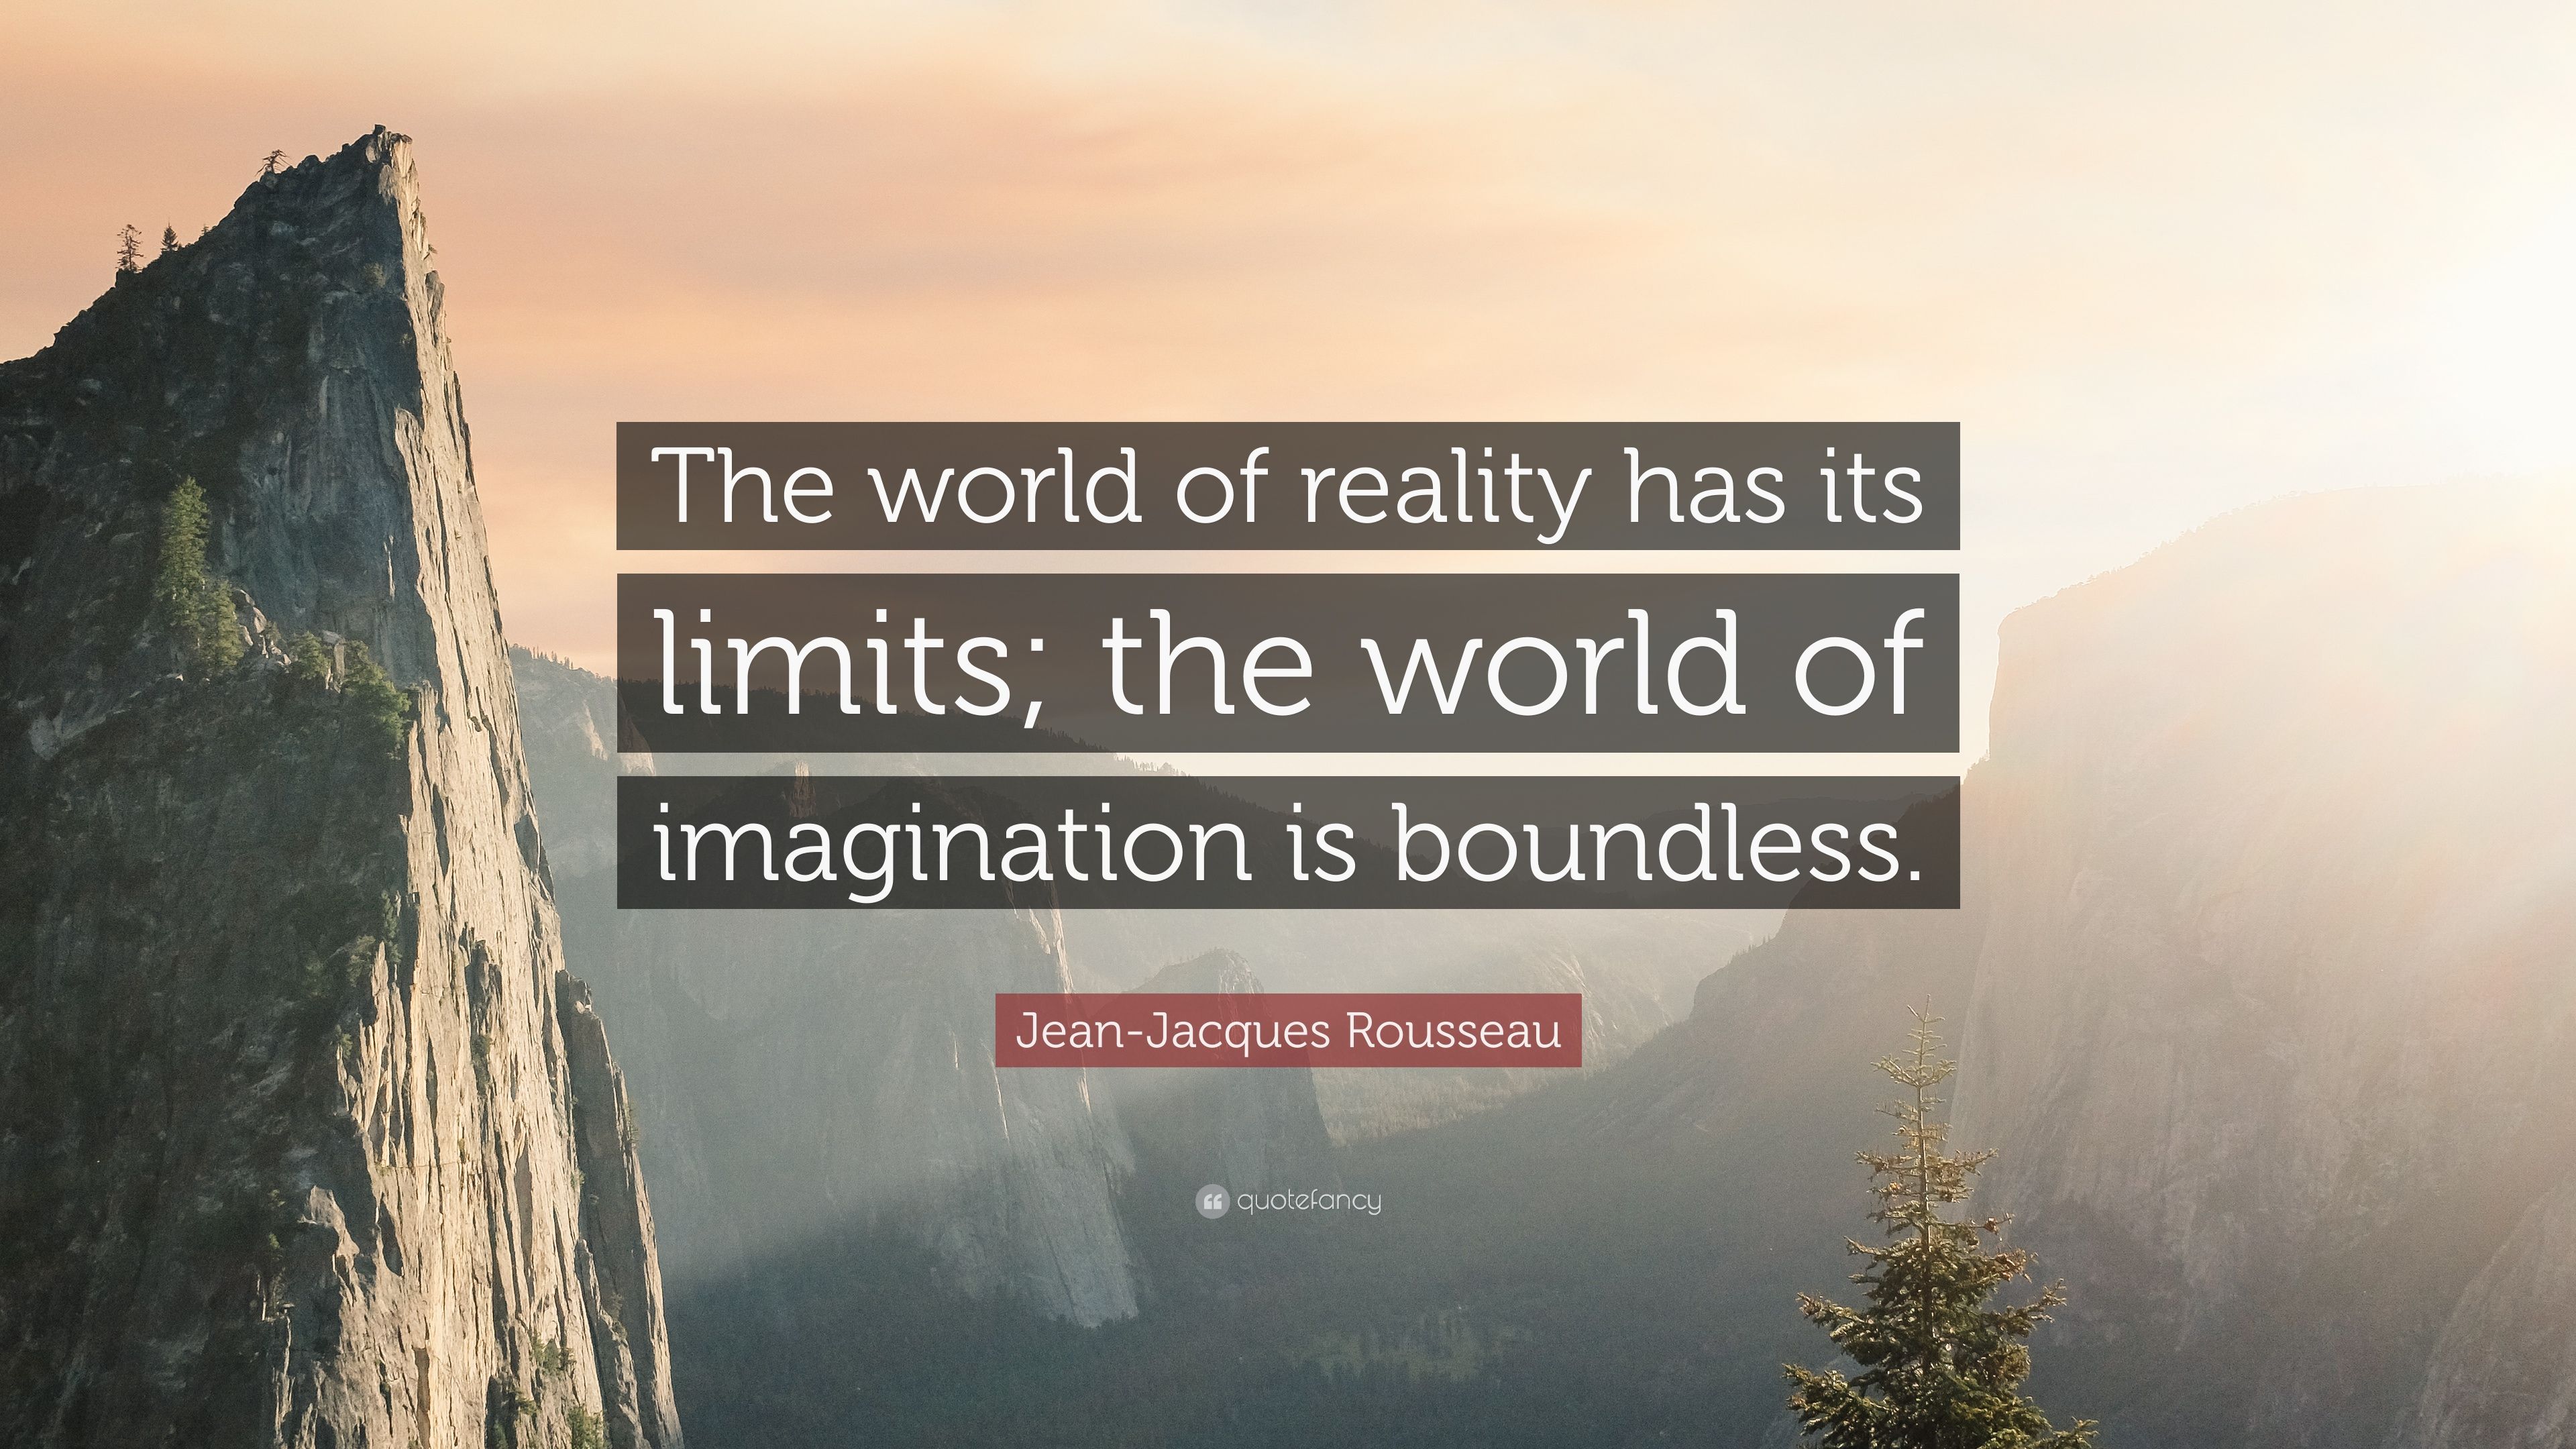 Jean Jacques Rousseau Quote: “The World Of Reality Has Its Limits; The World Of Imagination Is Boundless.” (12 Wallpaper)